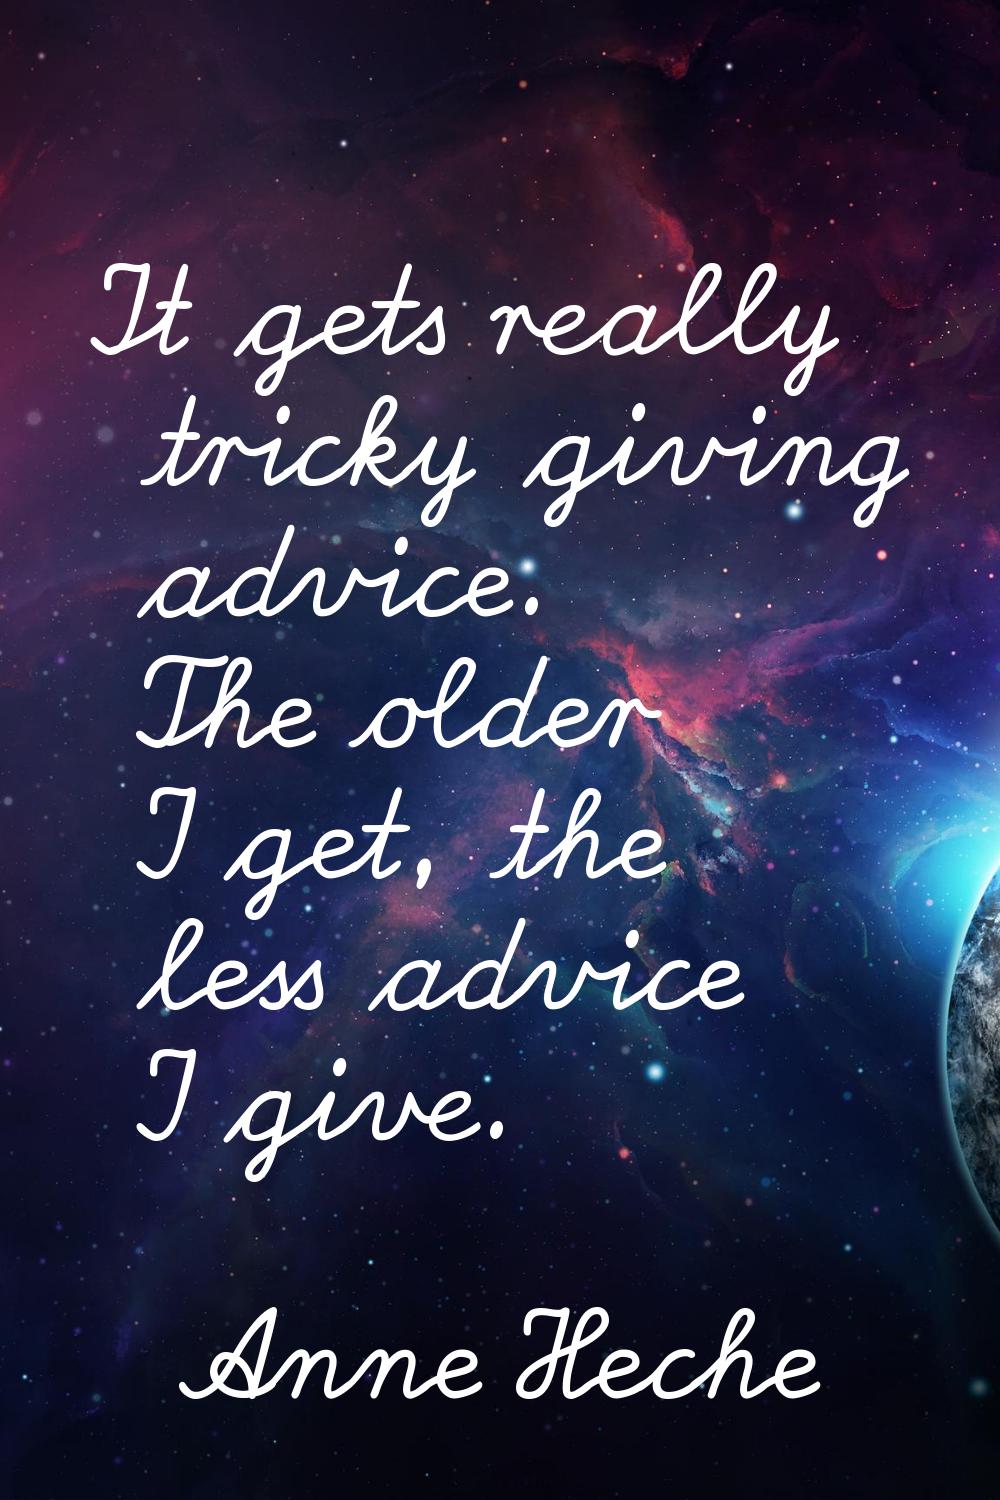 It gets really tricky giving advice. The older I get, the less advice I give.